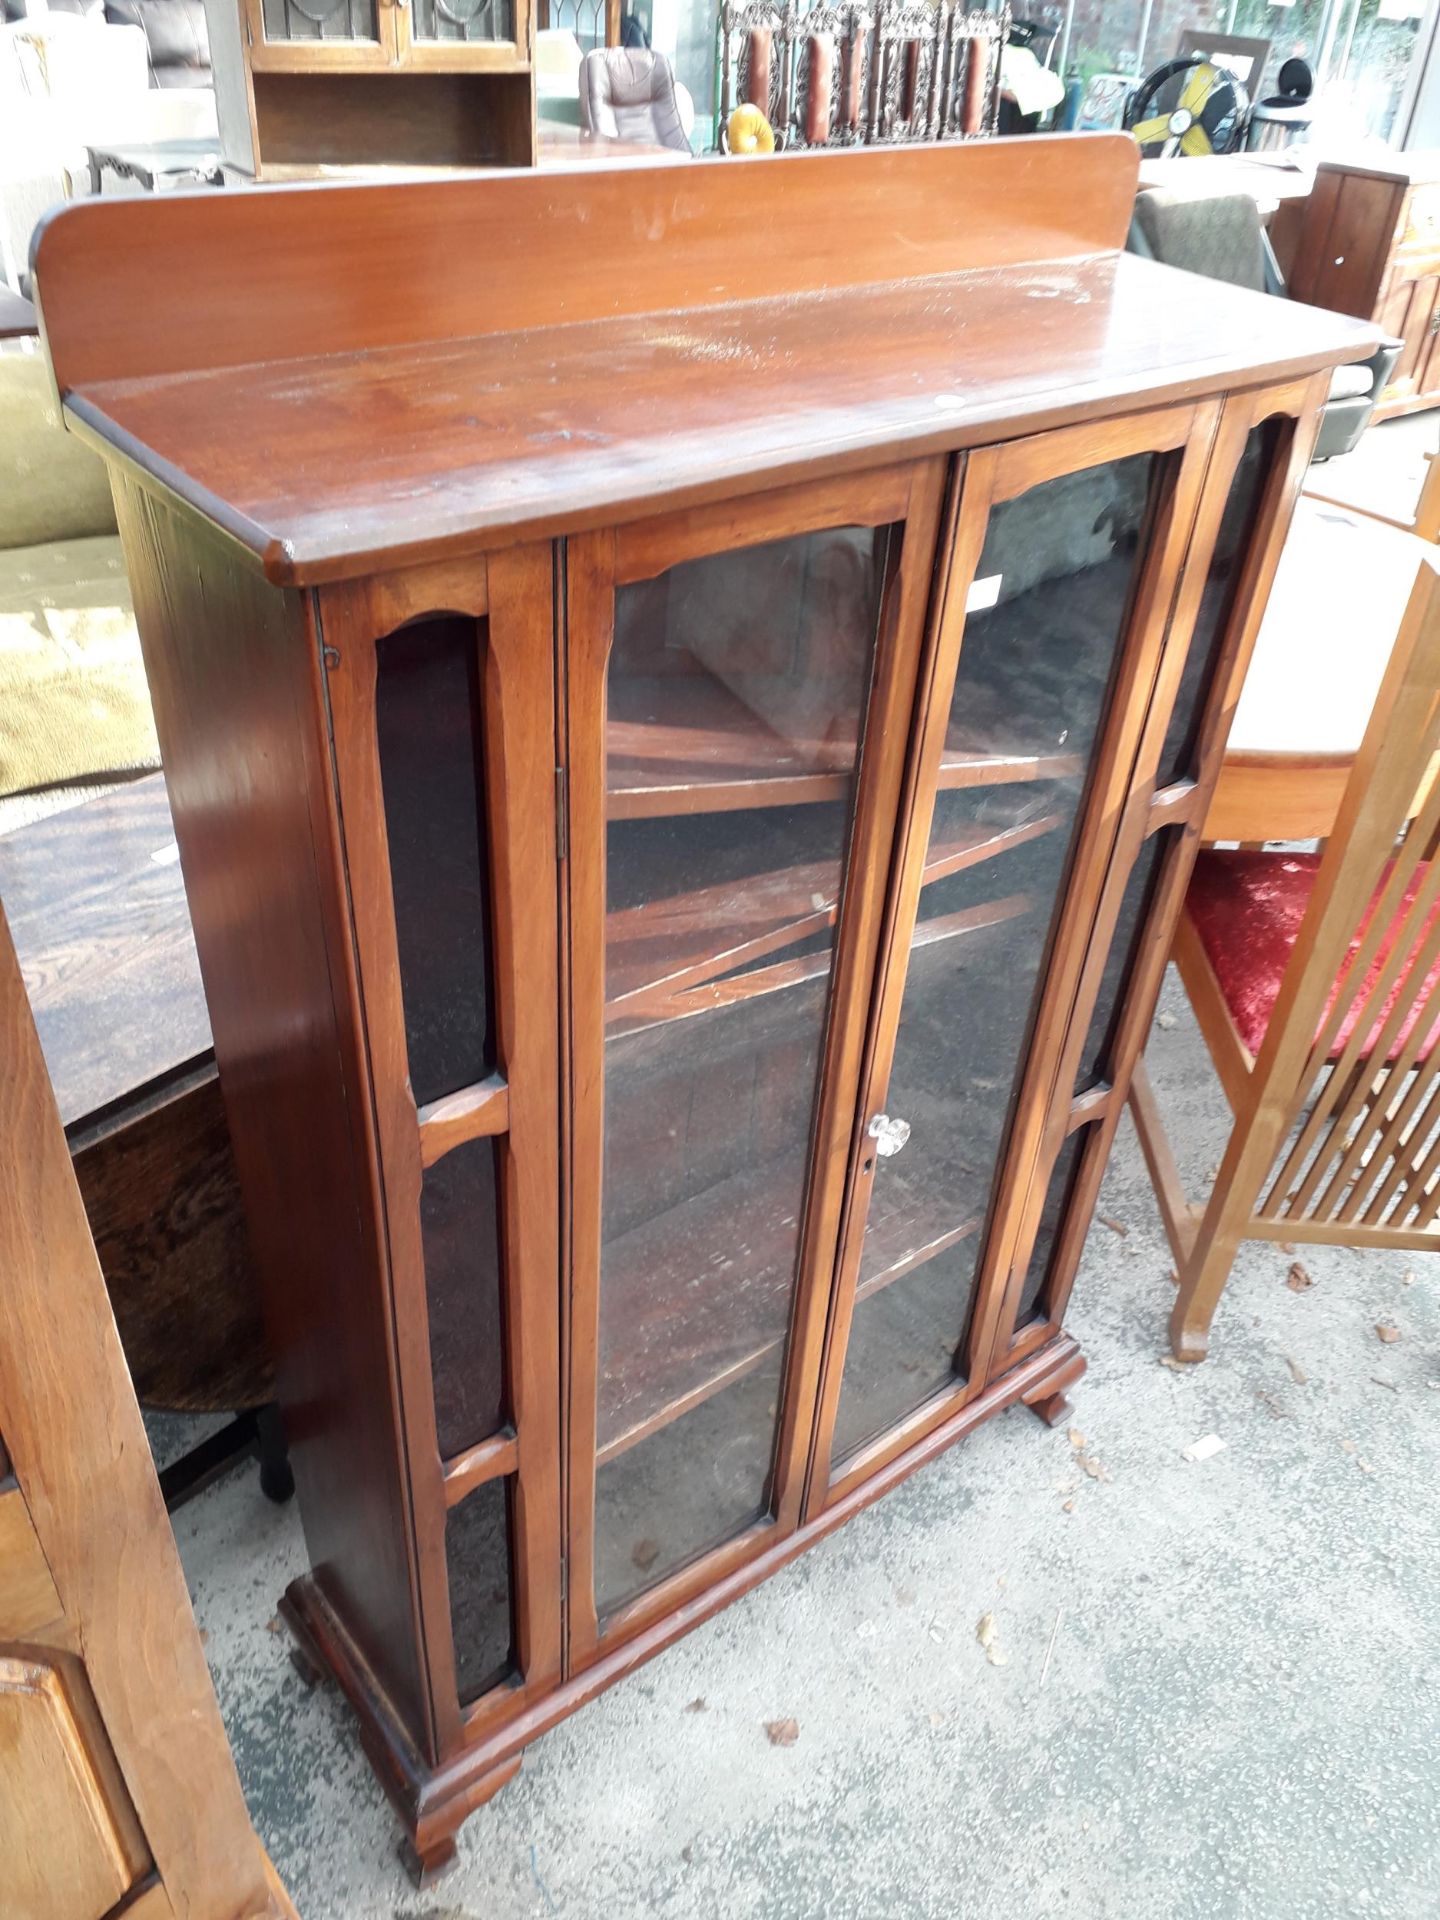 AN EARLY 20TH CENTURY MAHOGANY TWO DOOR DISPLAY CABINET, 38" WIDE - Image 2 of 3